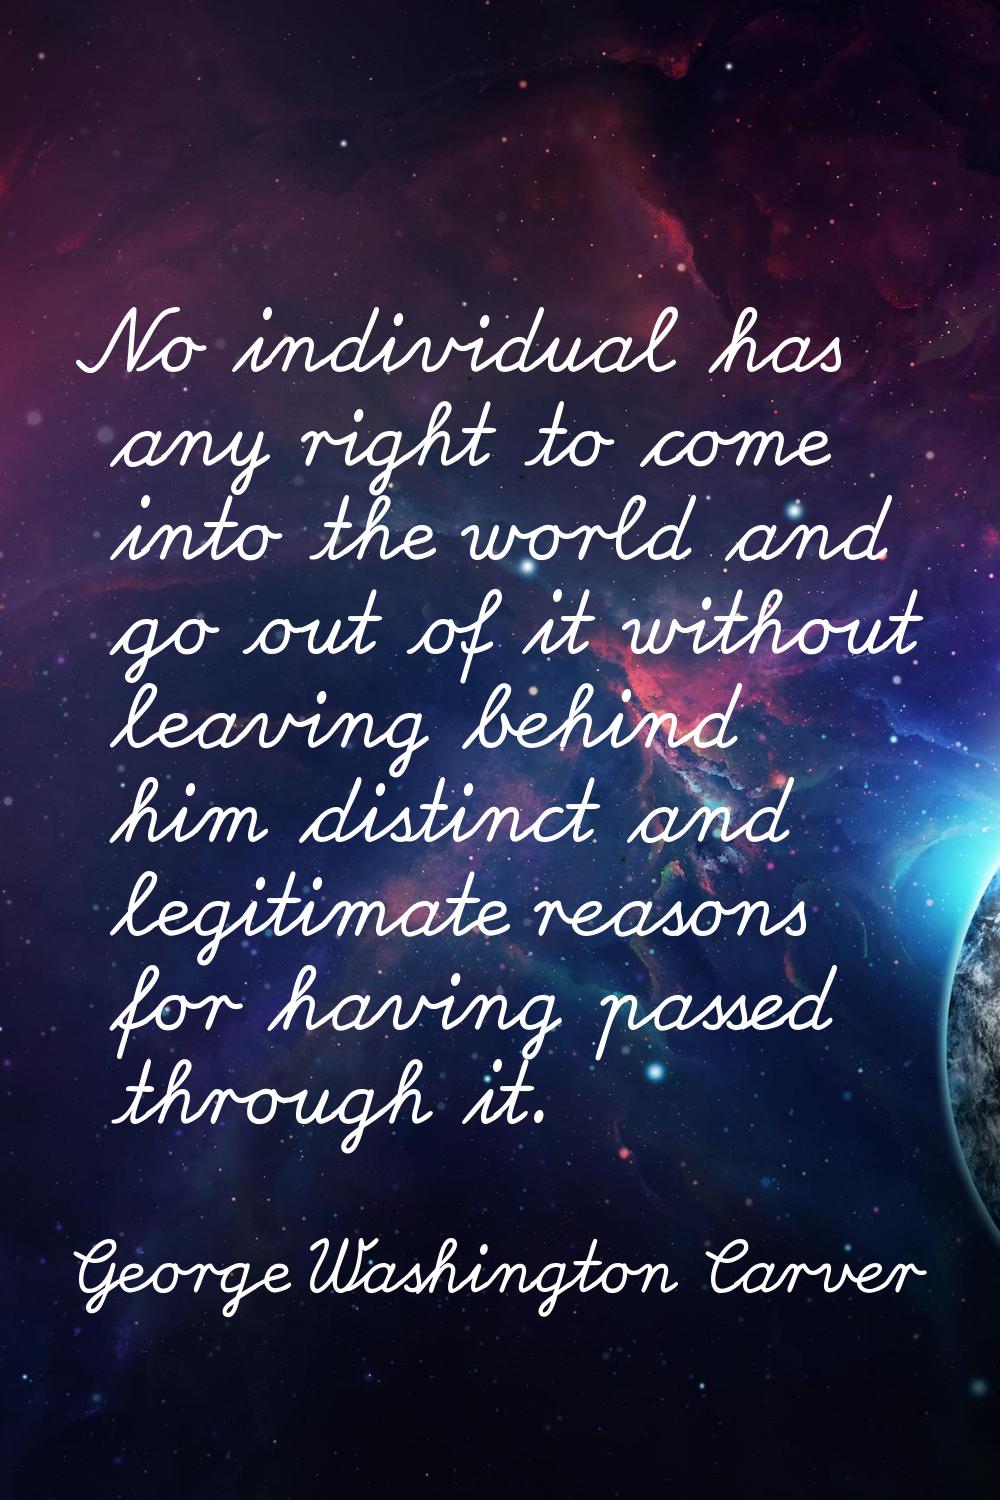 No individual has any right to come into the world and go out of it without leaving behind him dist